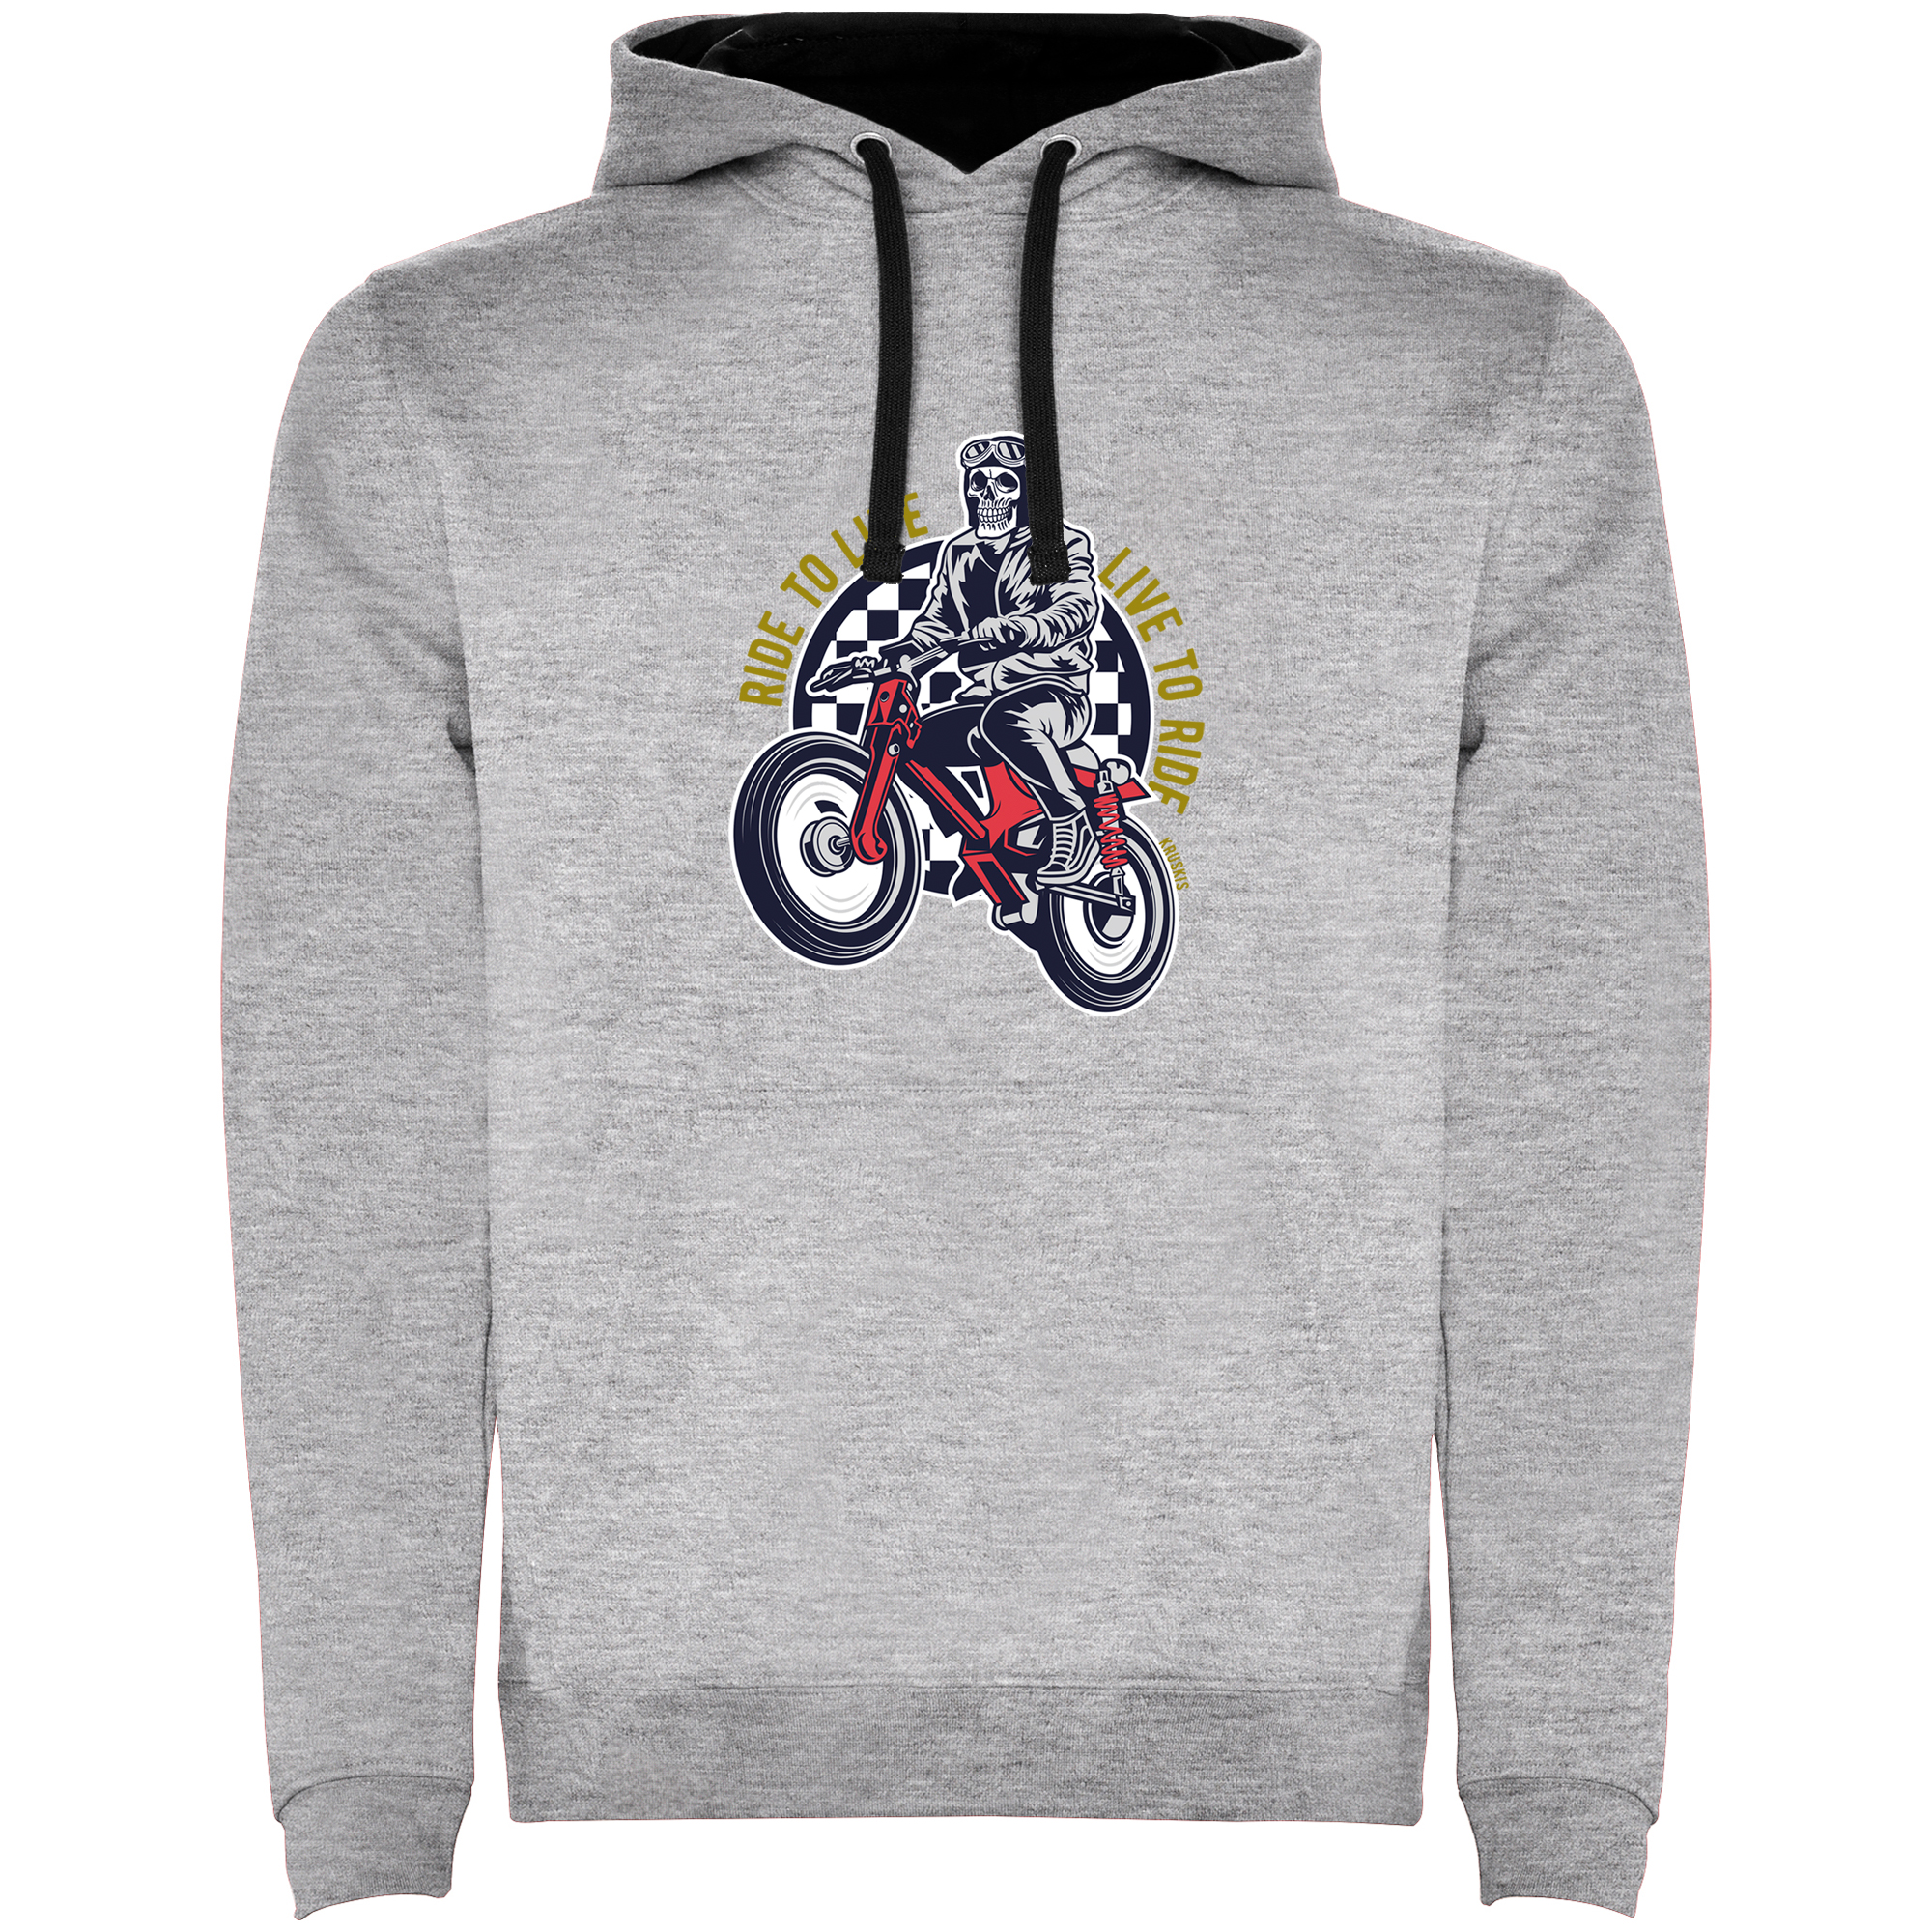 Hoodie Motorcycling Live to Ride Unisex